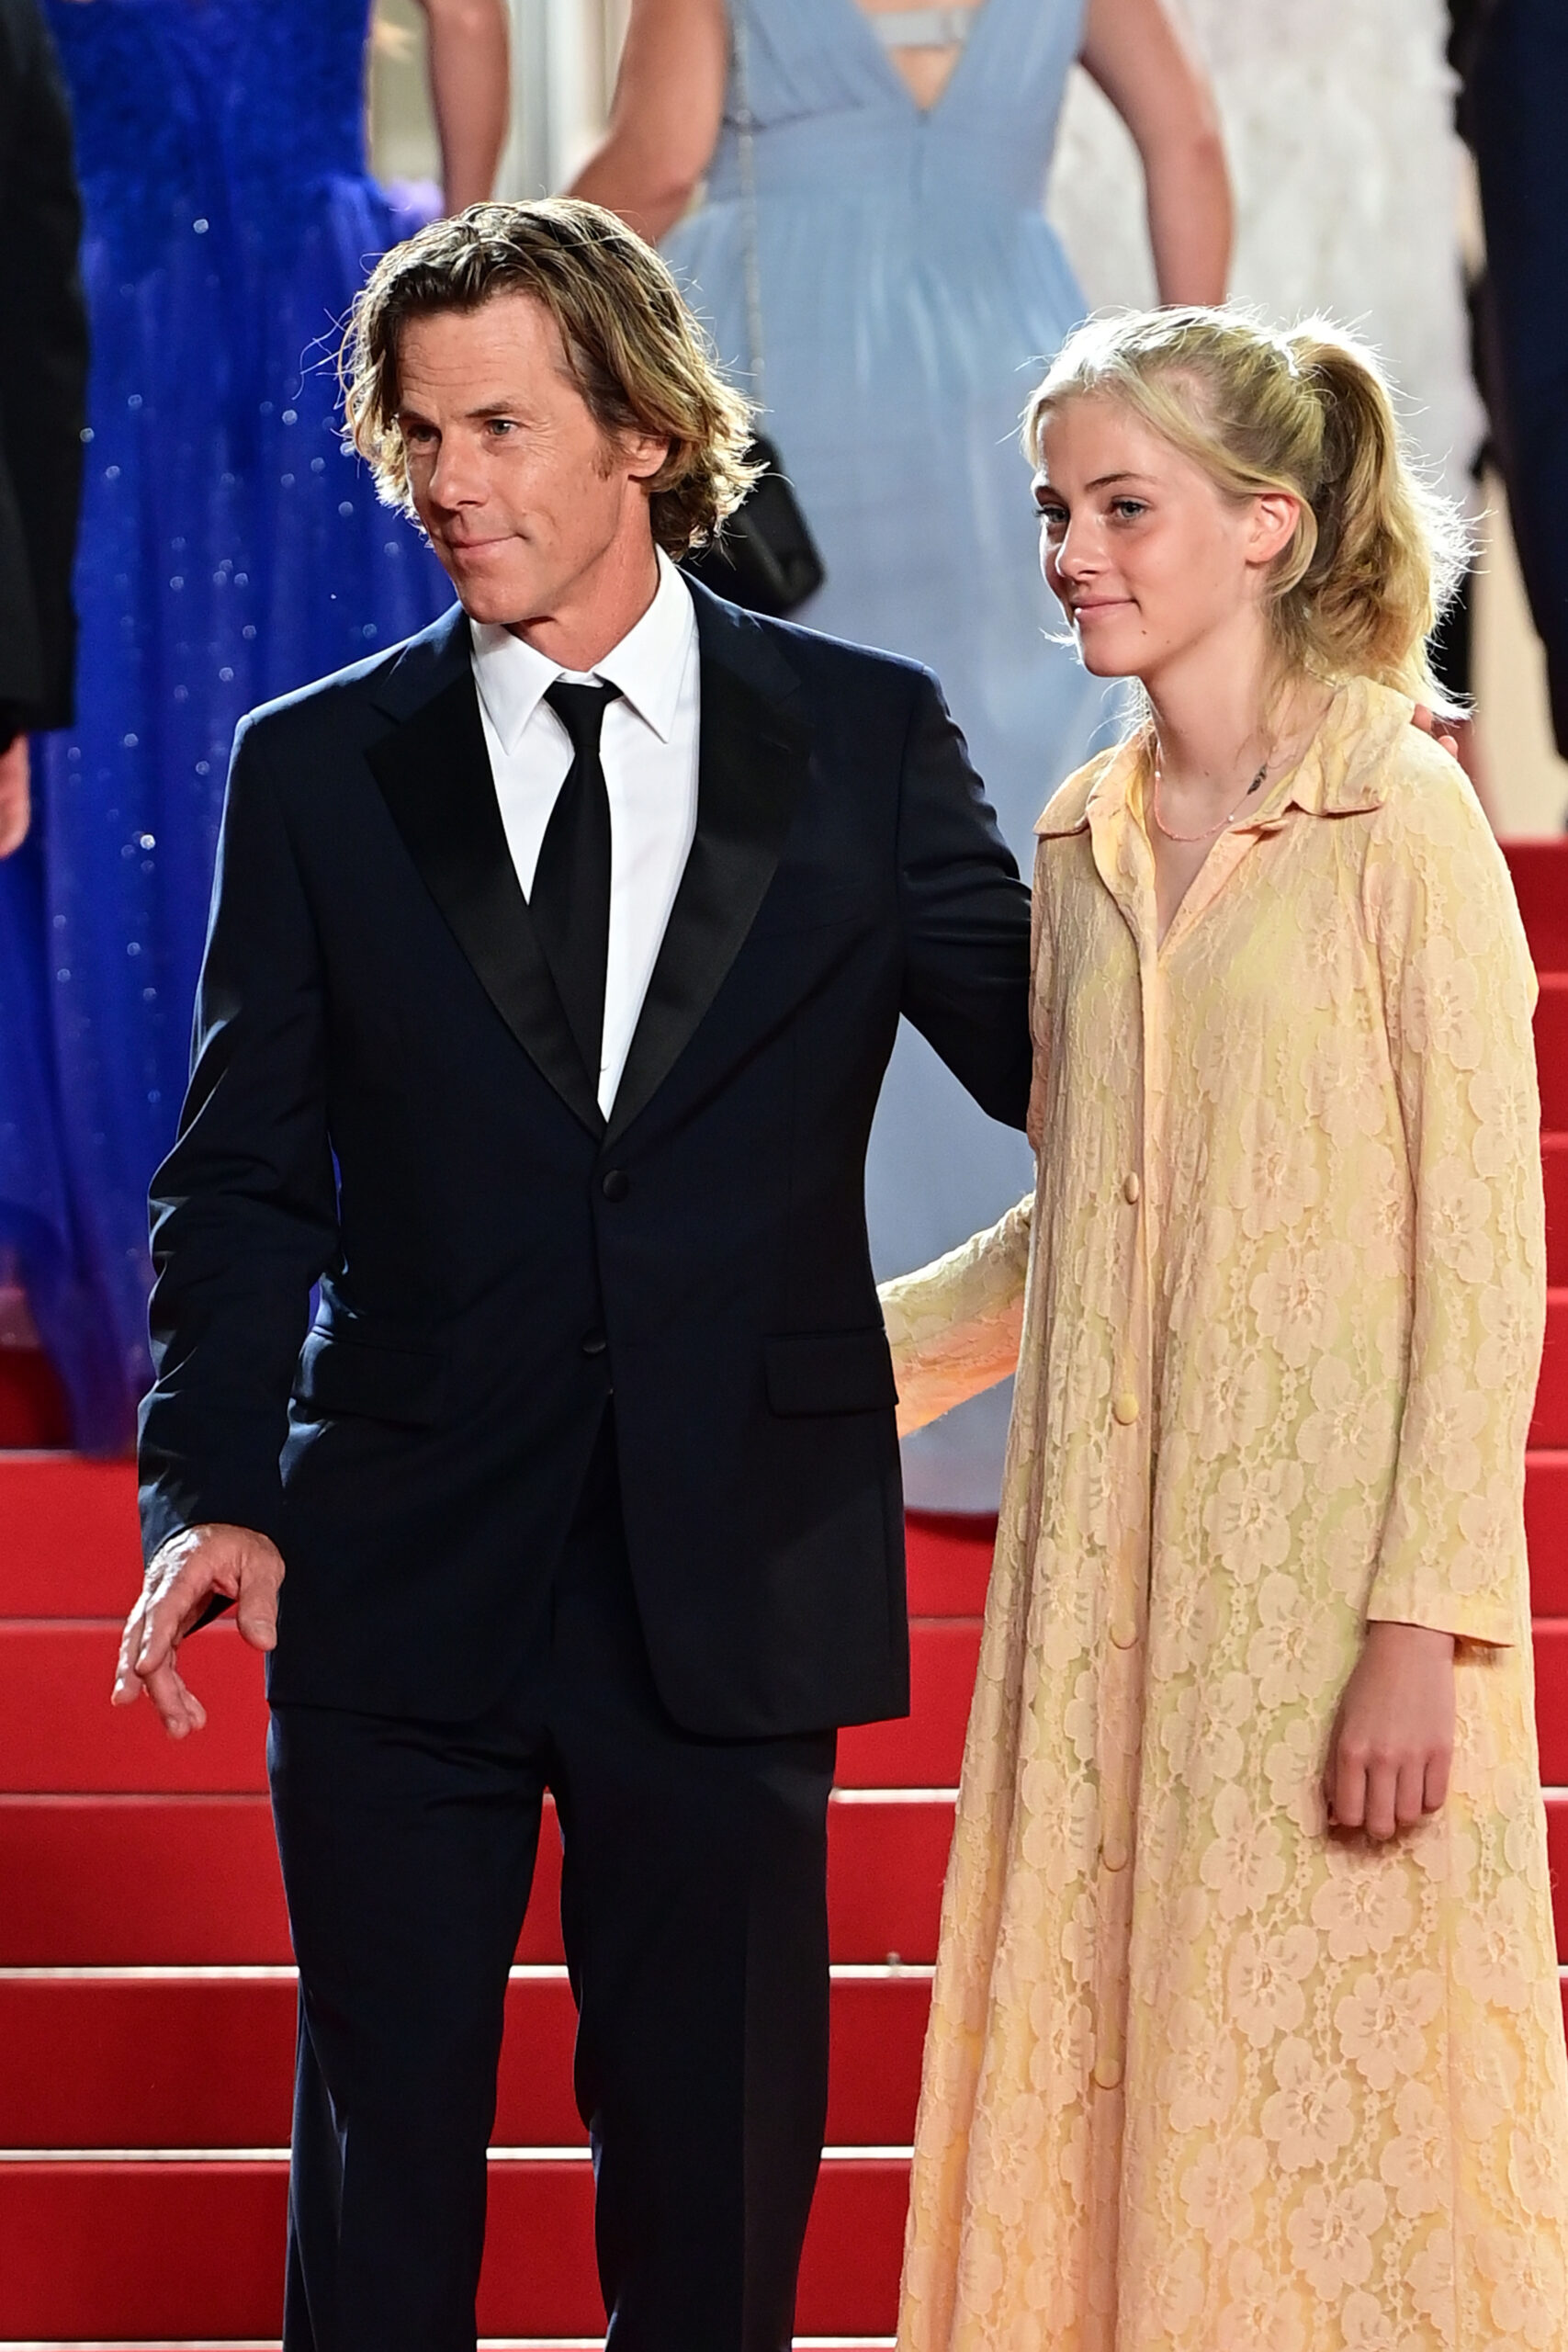 Danny Moder and Hazel Moder arrive at the premiere of "Flag Day" during the 74th Cannes Film Festival in Cannes, France, on July 10, 2021. | Source: Getty Images